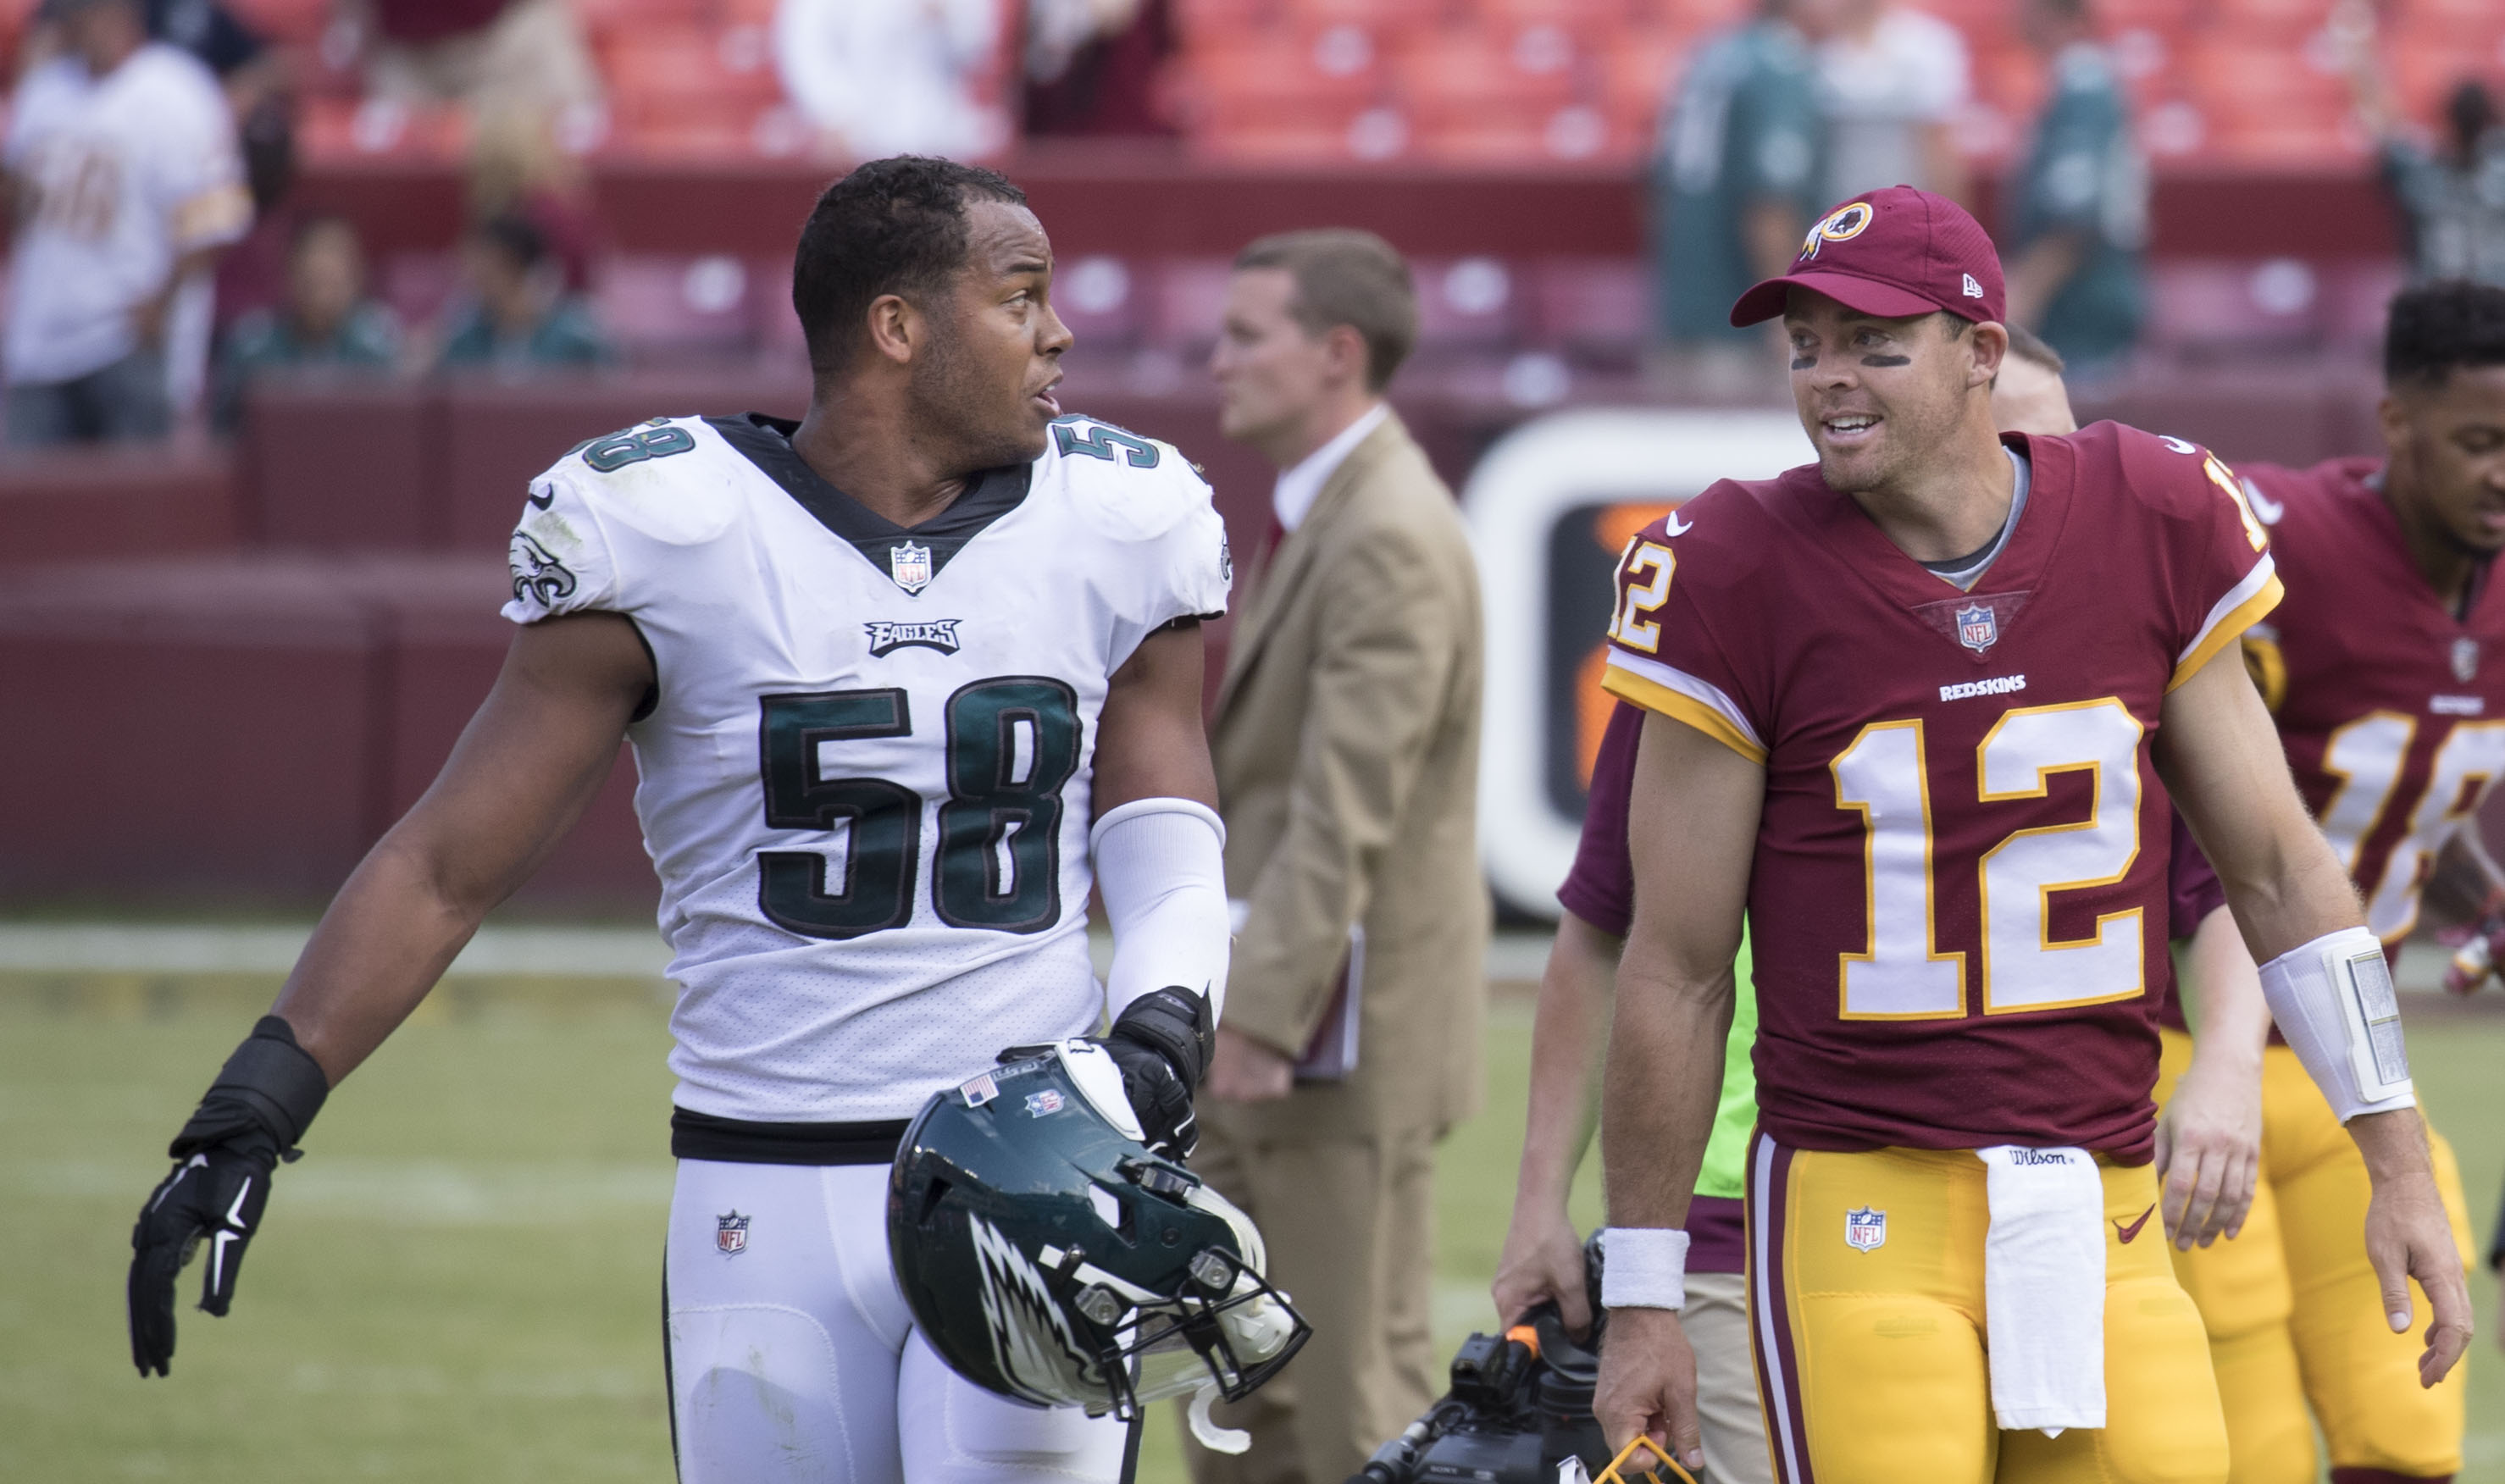 Jordan Hicks signed by Arizona Cardinals for USD 36 million for 4 year period